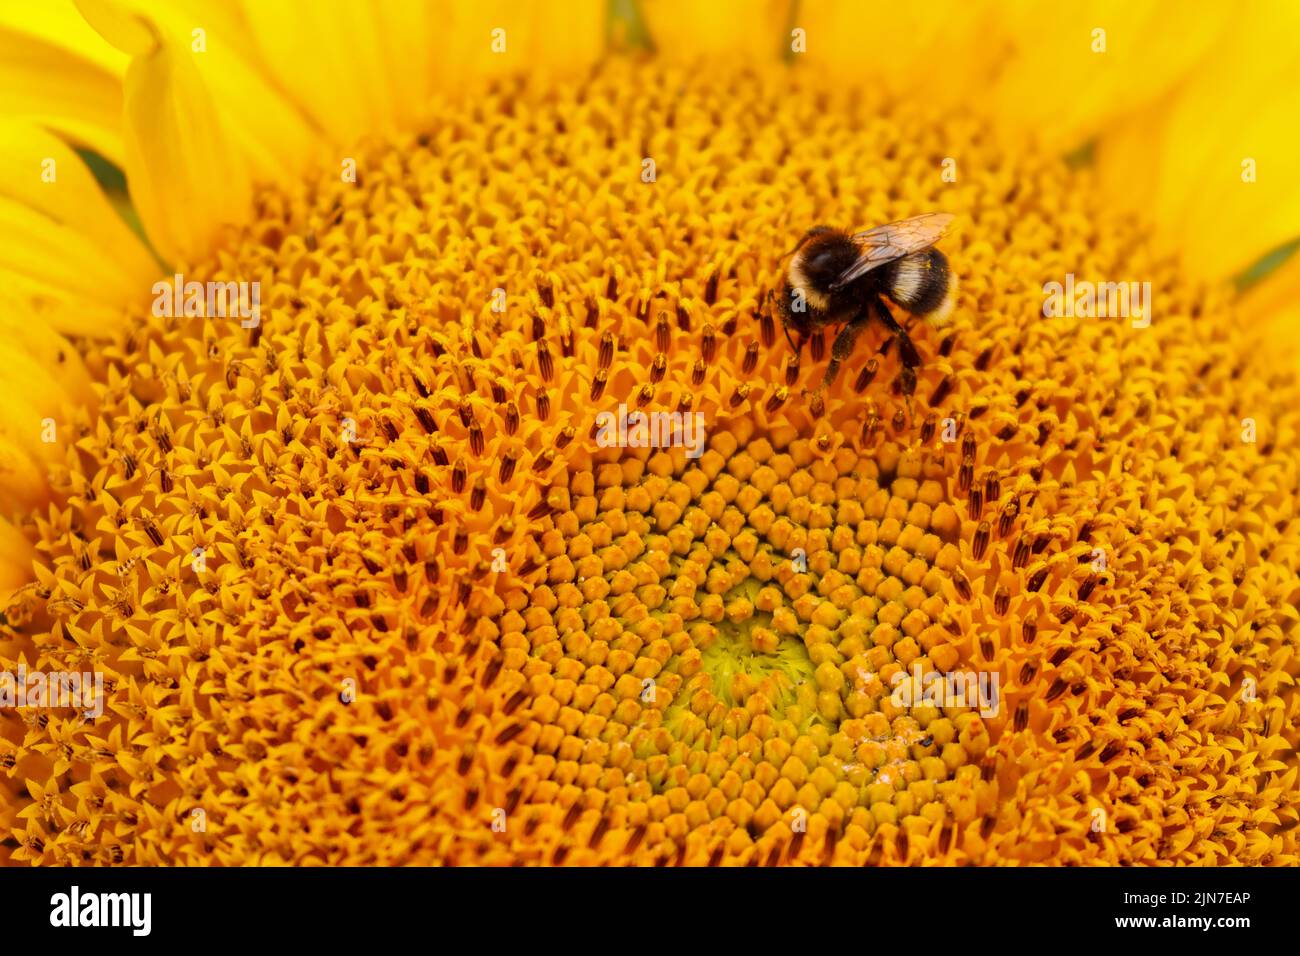 Bee on sunflower, macro closeup. Bright yellow flower 'Helianthus' with insect collecting pollen, nectar. Dublin, Ireland Stock Photo